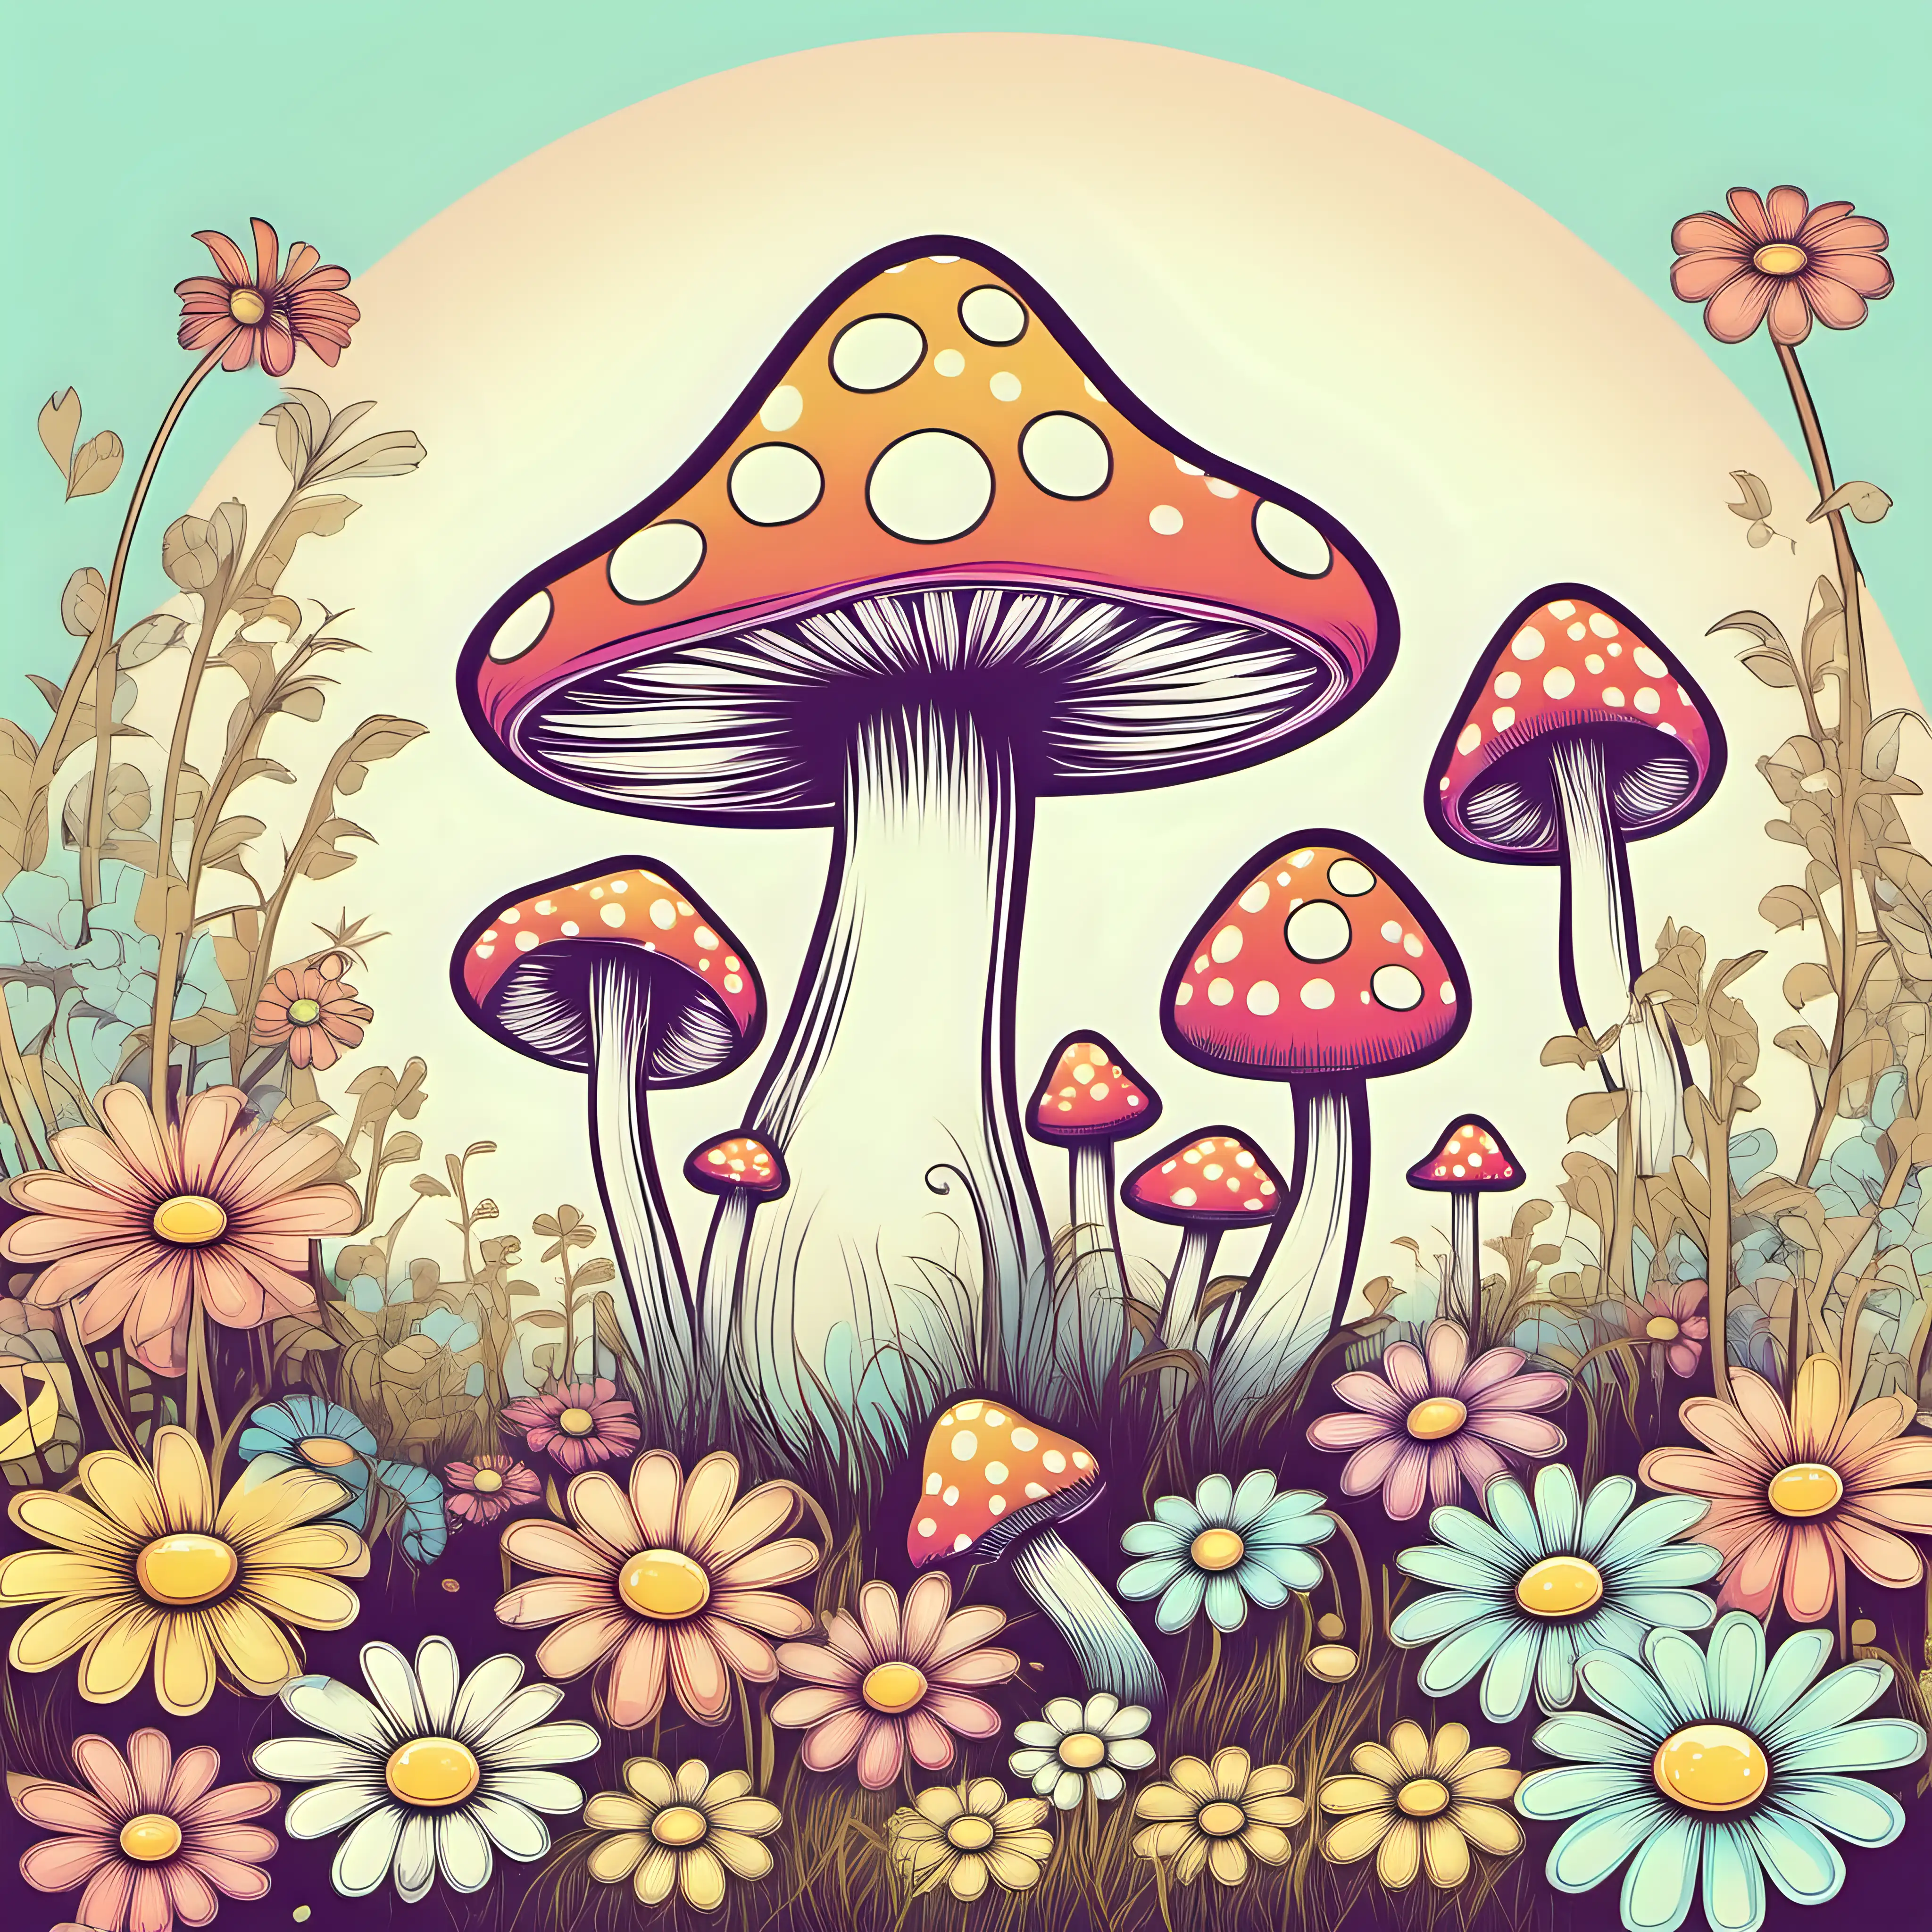 Psychedelic Cartoon Mushroom with Retro Colors and Daisies on White Background